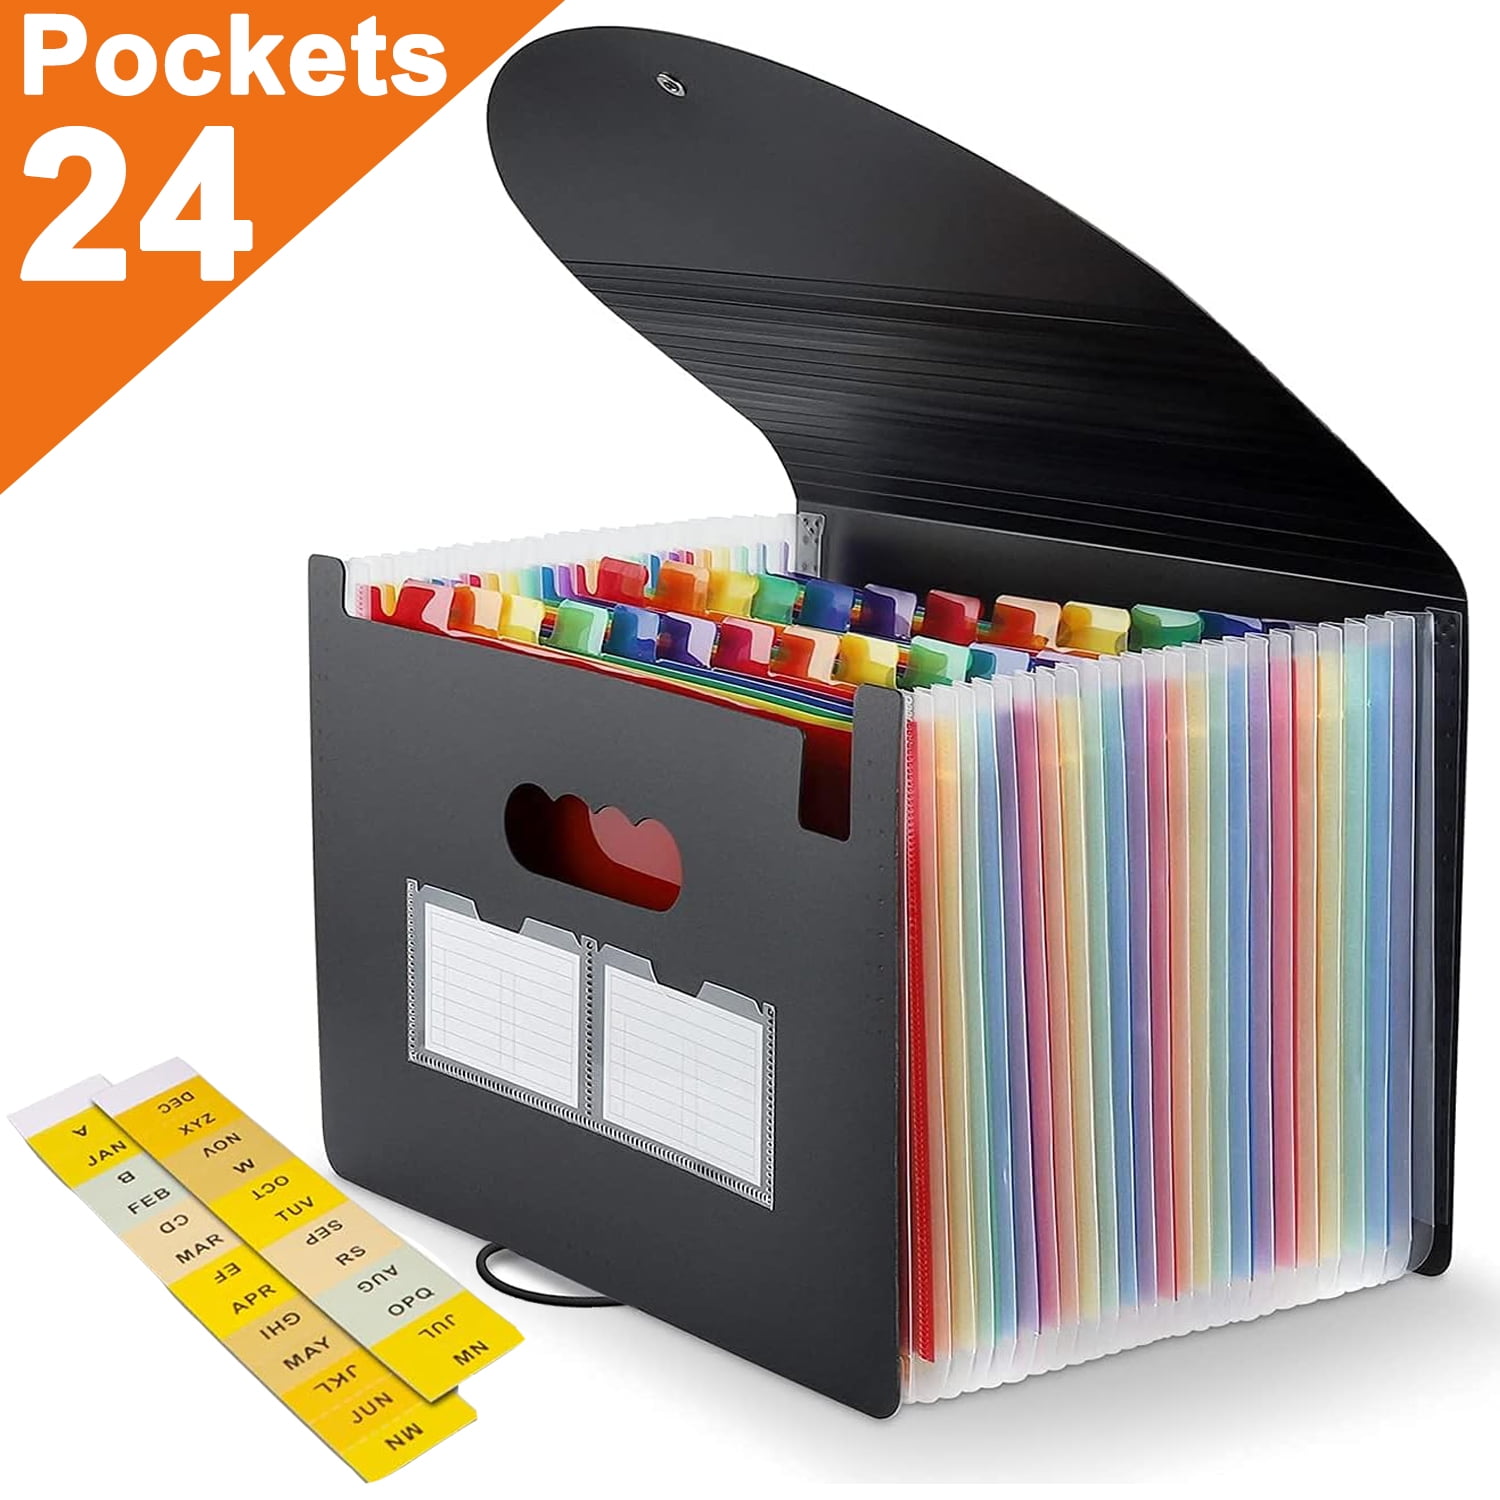 PHANCIR 24 Pockets Accordion File Organizer, Office Supplies Organizers  with Cover, A4 Letter Size File Box, Plastic Colored Paper Organizer  Expanding File Folder with A-Z/Month Sticker Tabs 